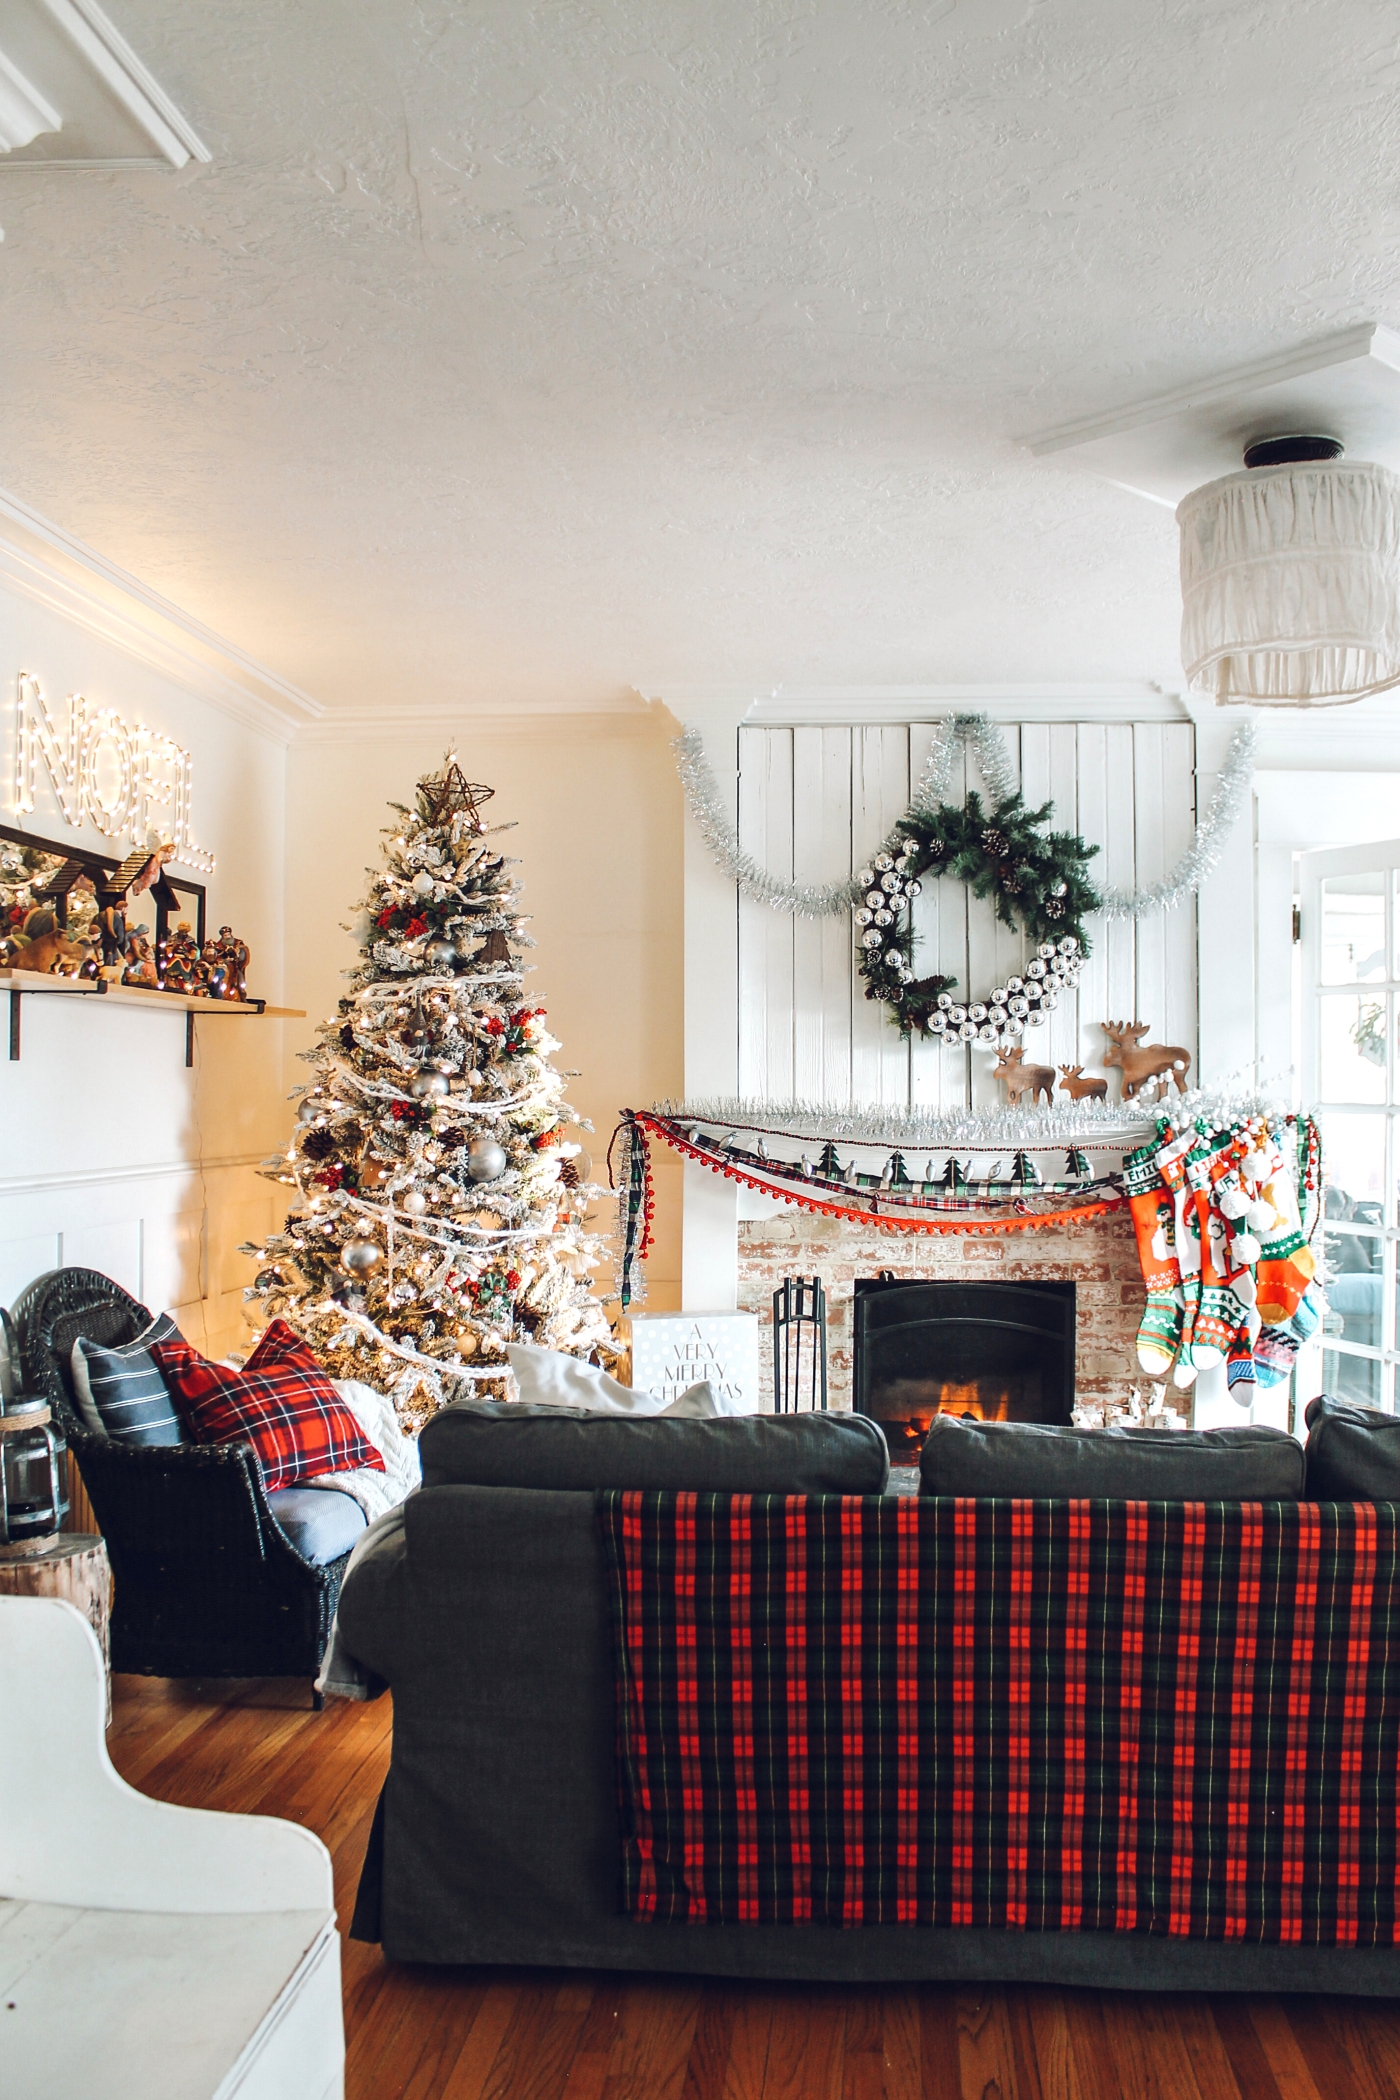 Our Christmas Living Room 2020 – Phase 2